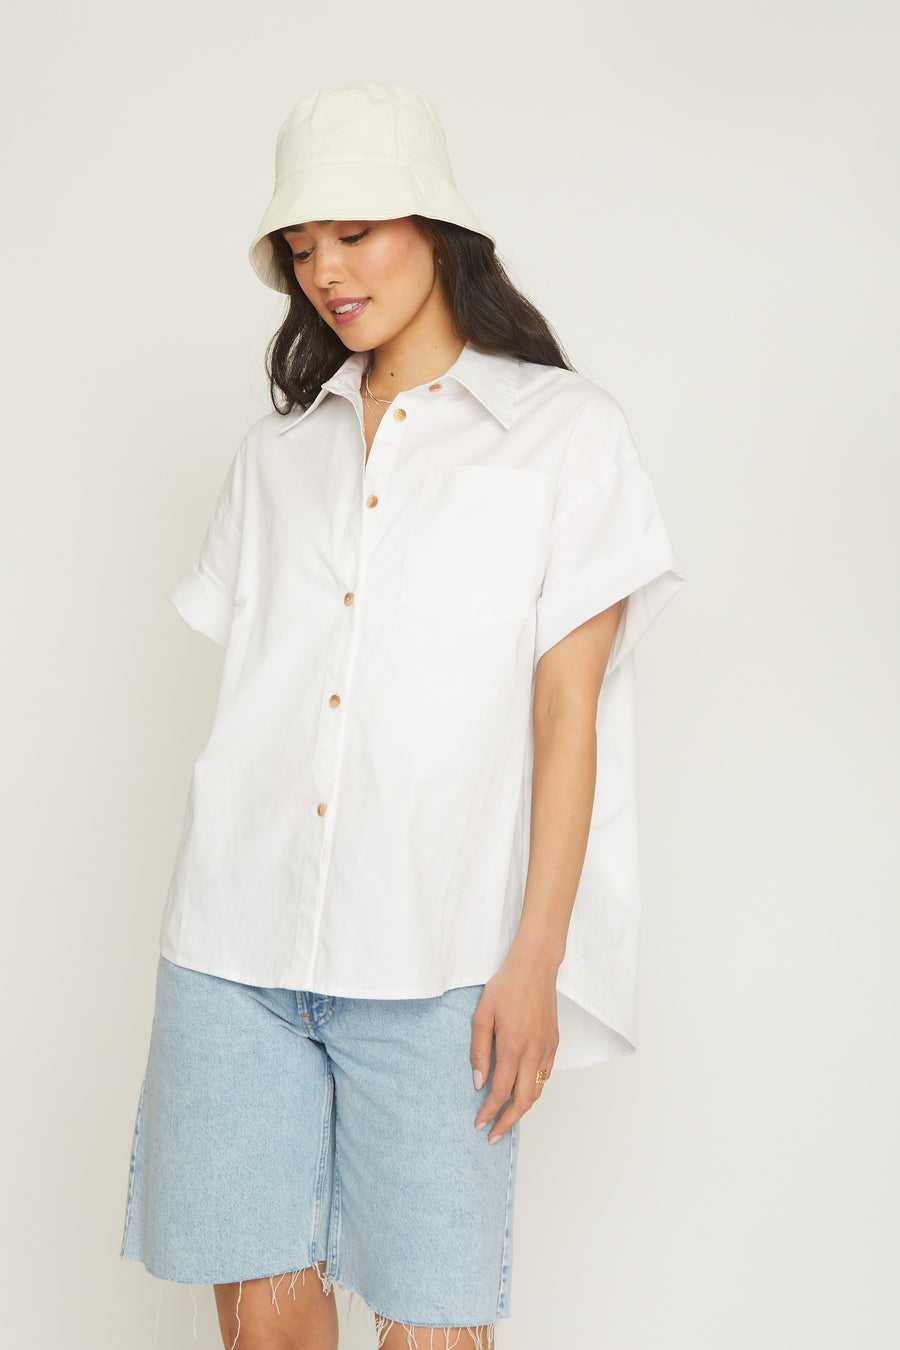 No Srcipt image - Images of 4 of 7 white button down shirt, 100% cotton, short sleeve, boxy, oversized fit, light-weight